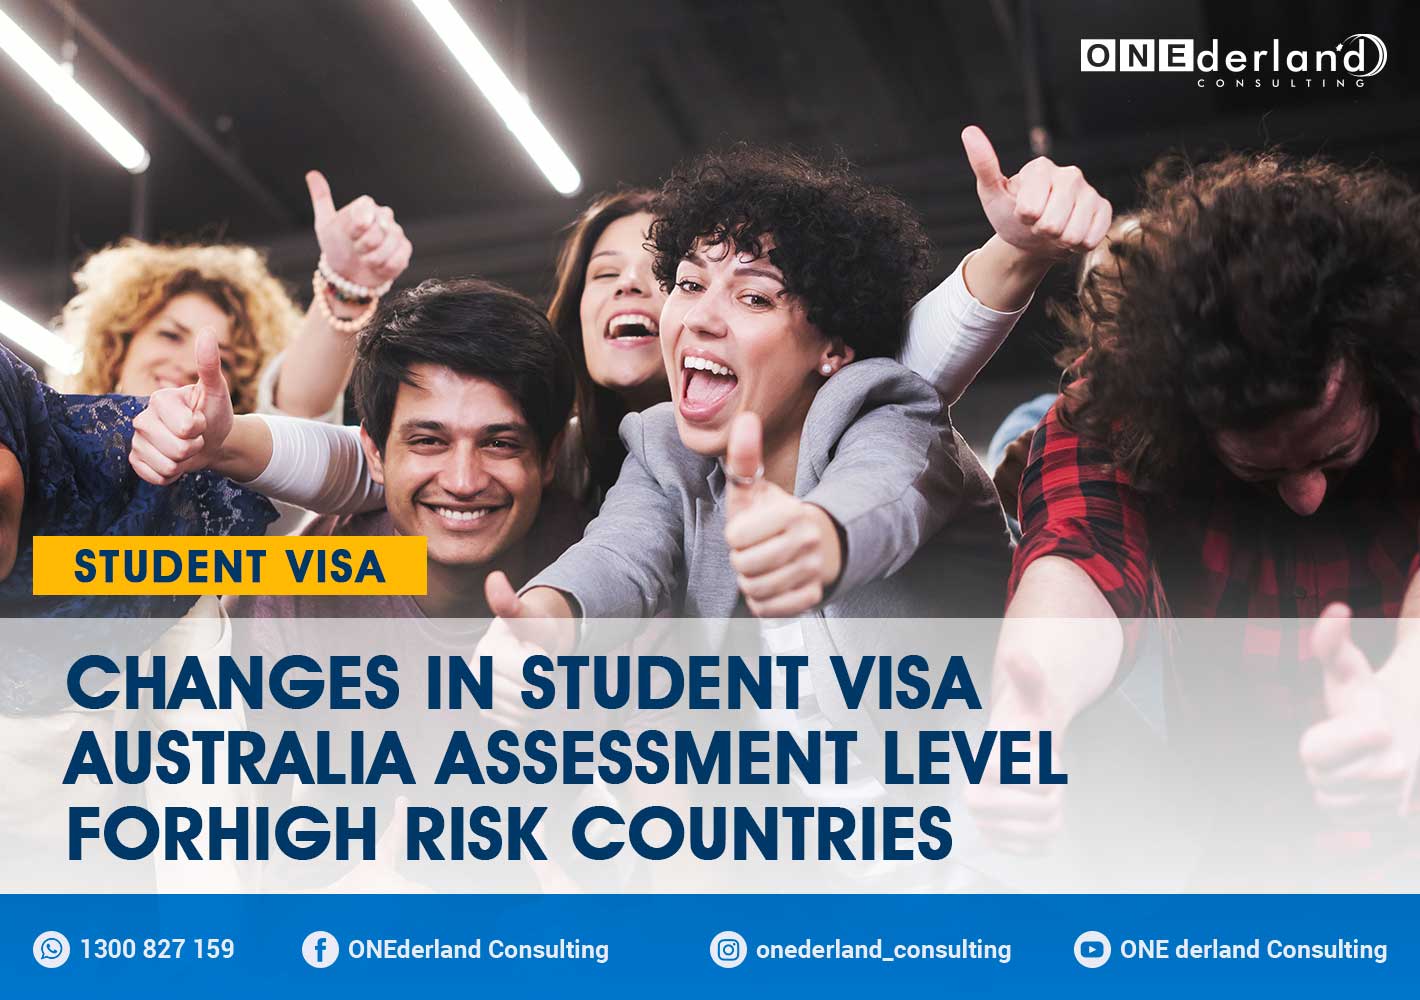 Student Visa Assessment Change For High Risk Countries